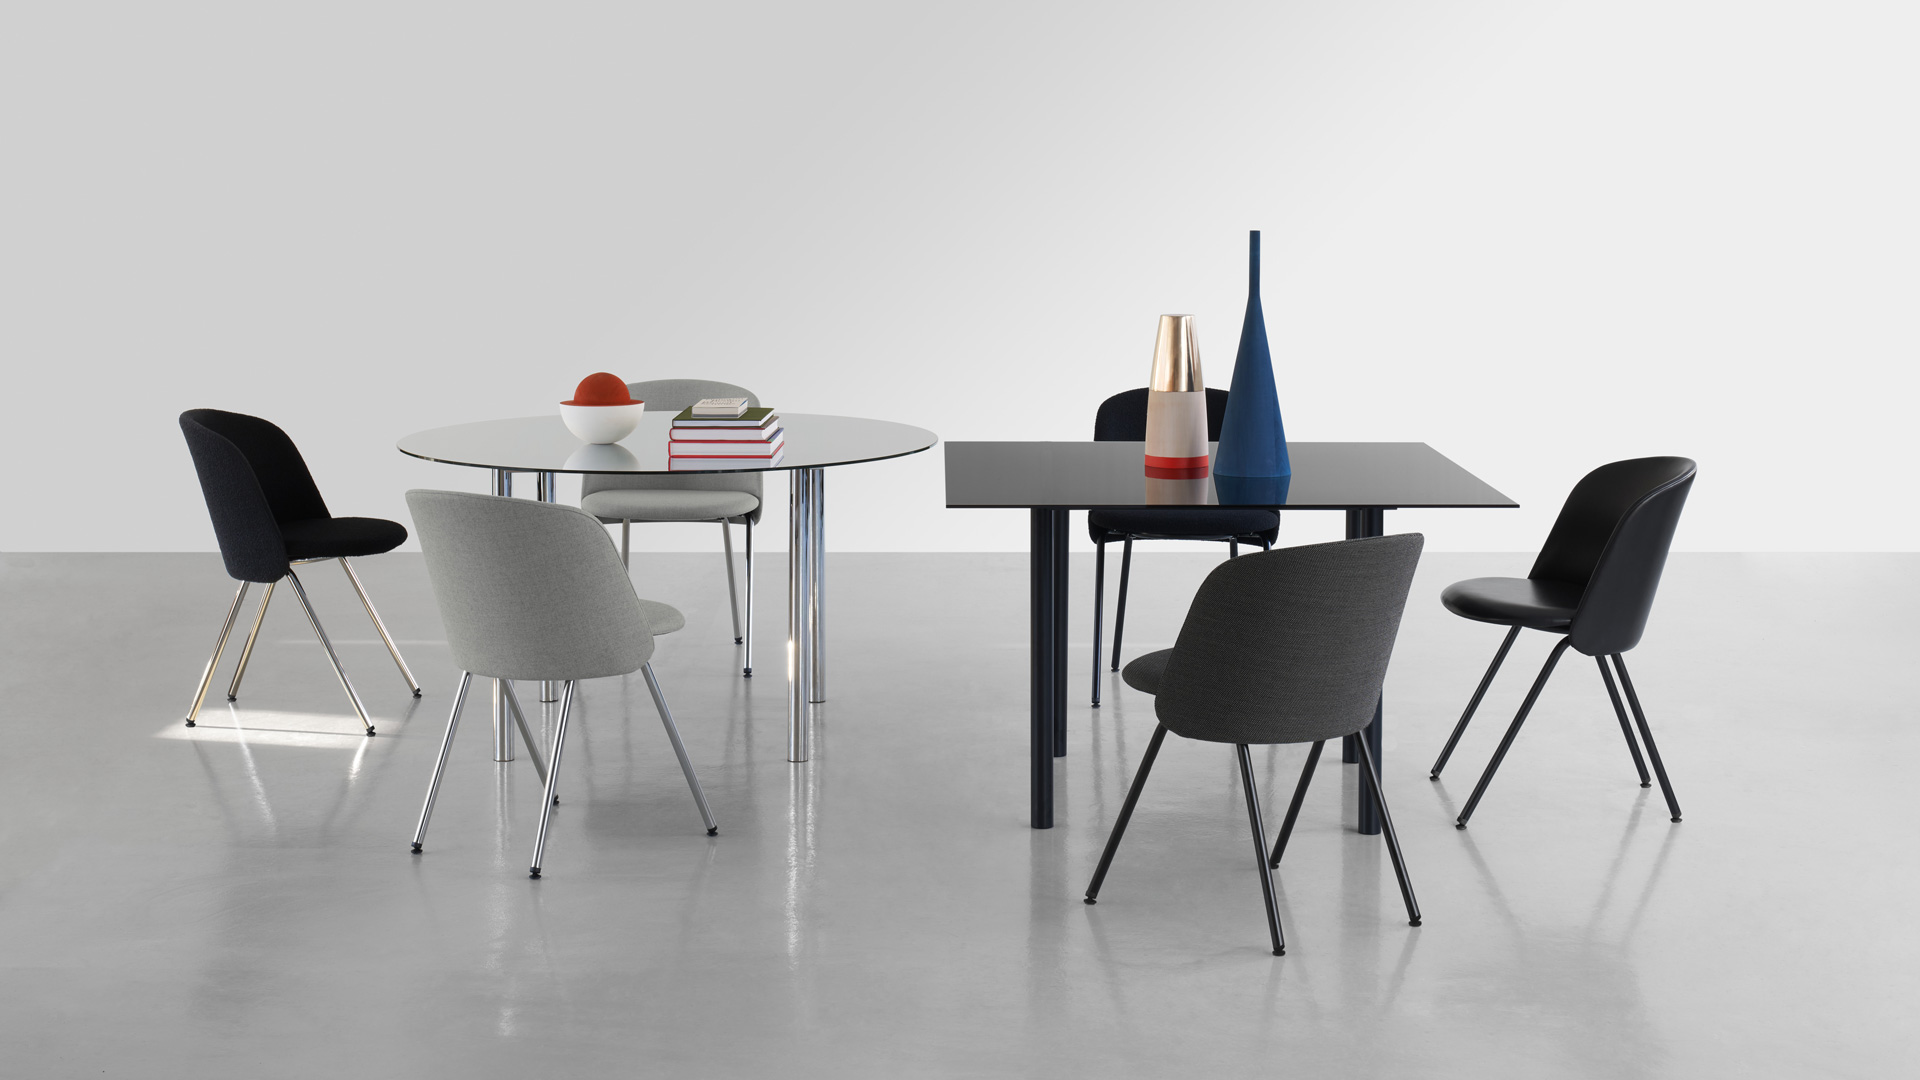 Theorem Table, Either Chair, Lifestyle